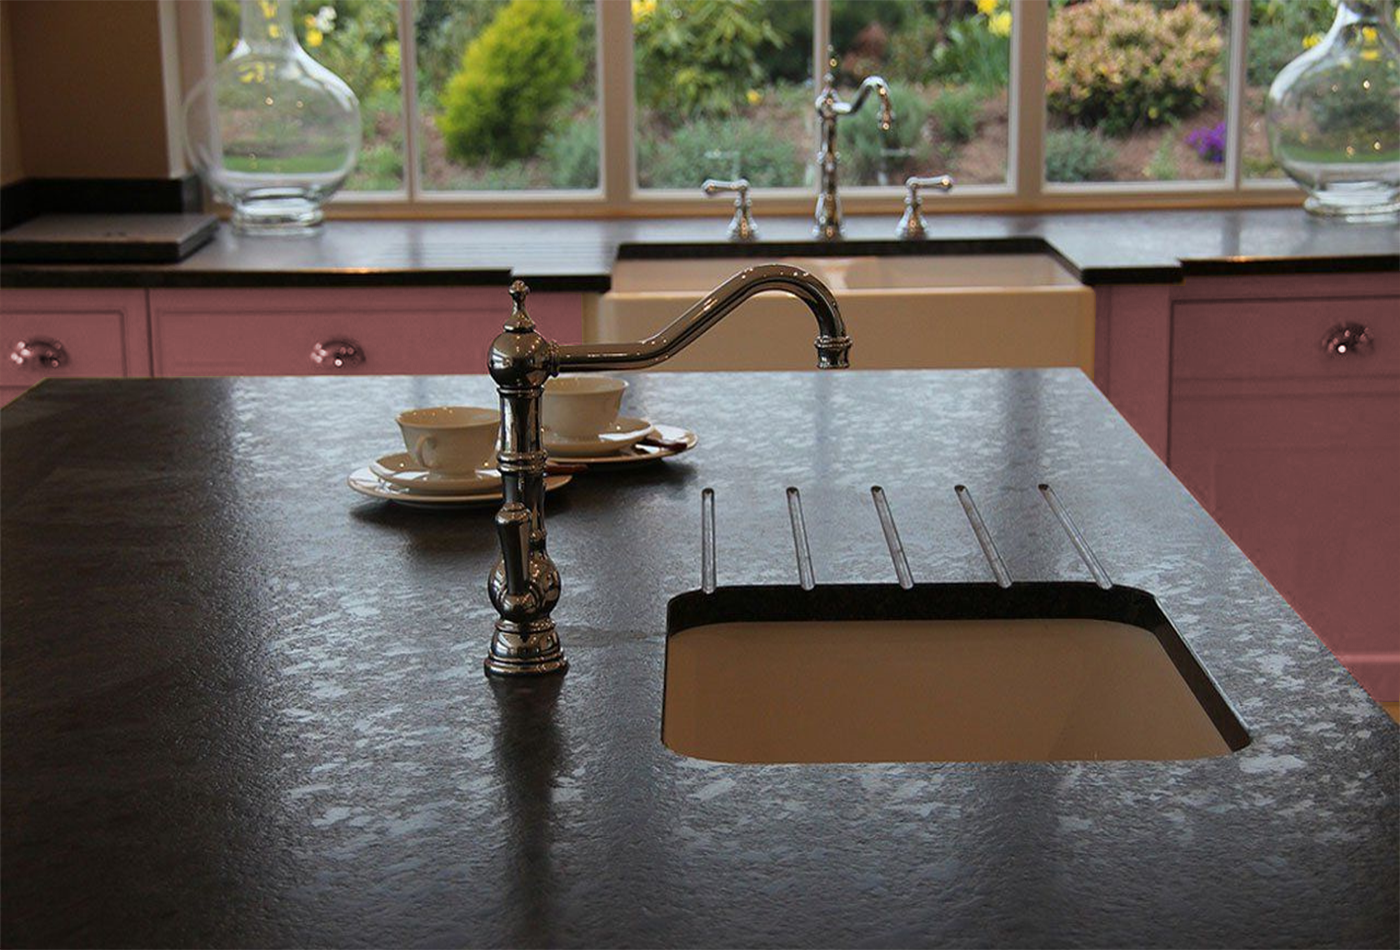 Do you need to Seal Leathered Work top Made of Black Pearl Granite